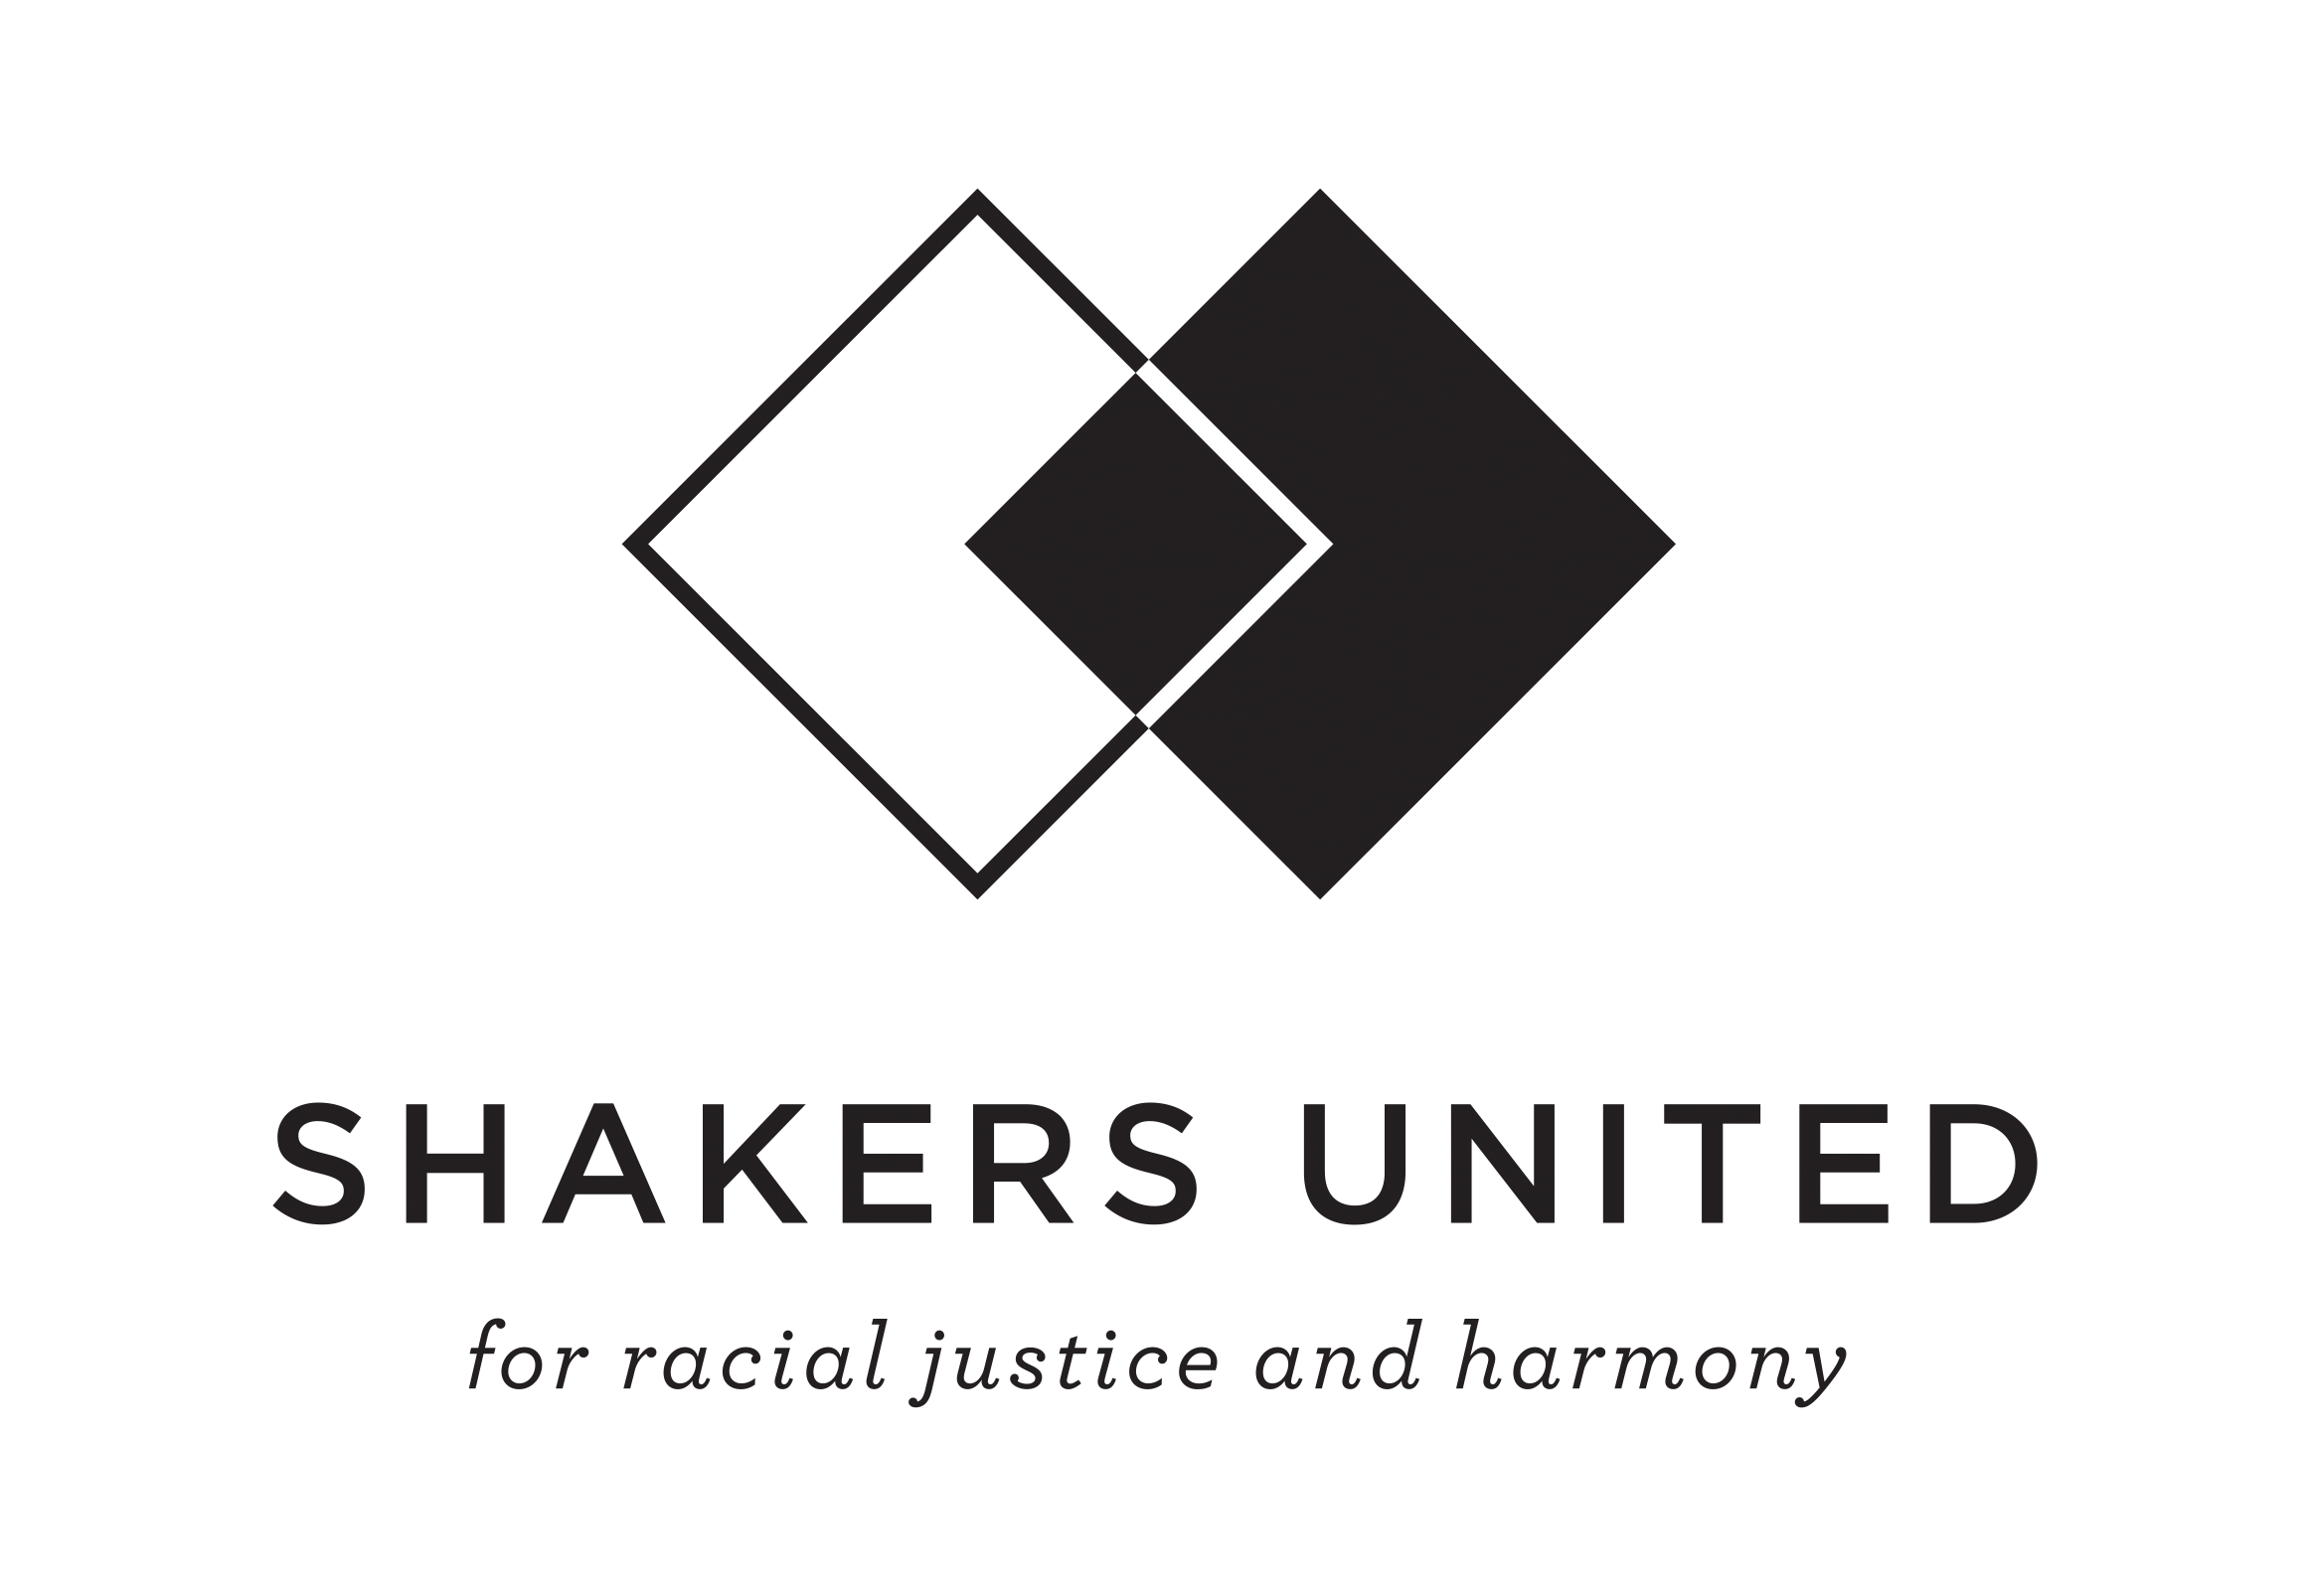 Shakers United